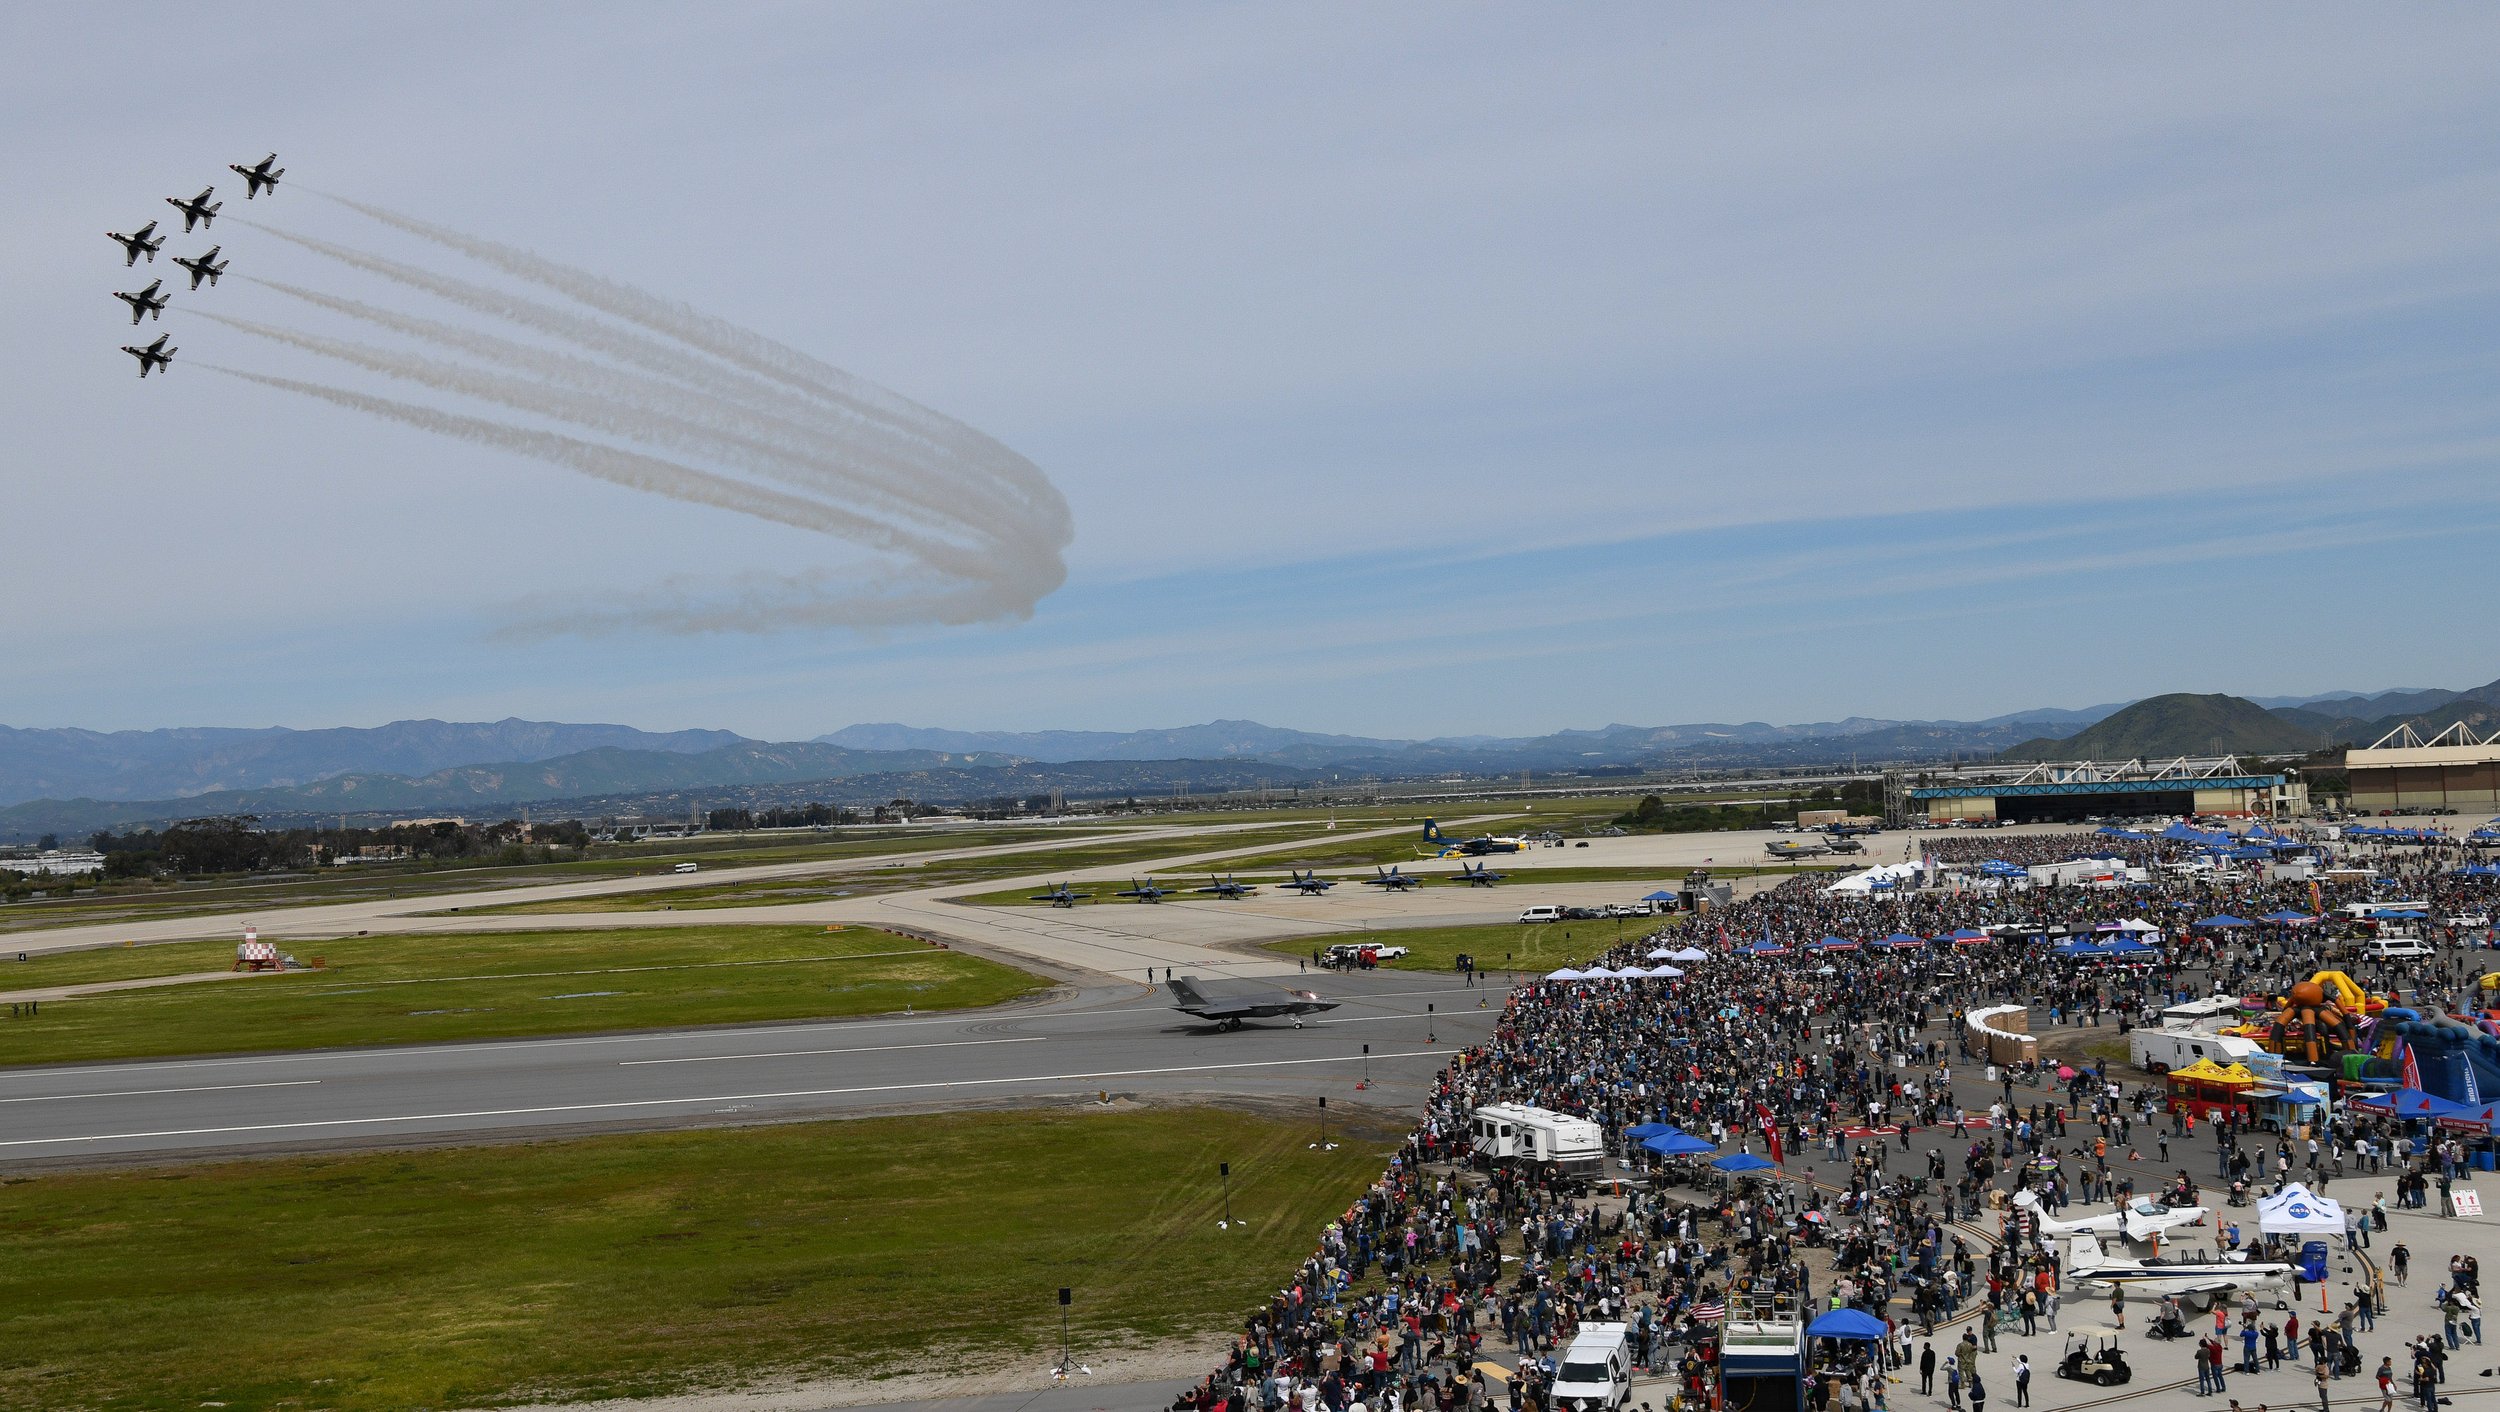  U.S. Air Force Demonstration Squadron, the Thurderbirds, performs in the F/16 Fighter Falcons at the Point Mugu Air Show March 17-19 at Naval Base Ventura County in California. About 205,000 civilians, volunteers, and military personnel attended acr